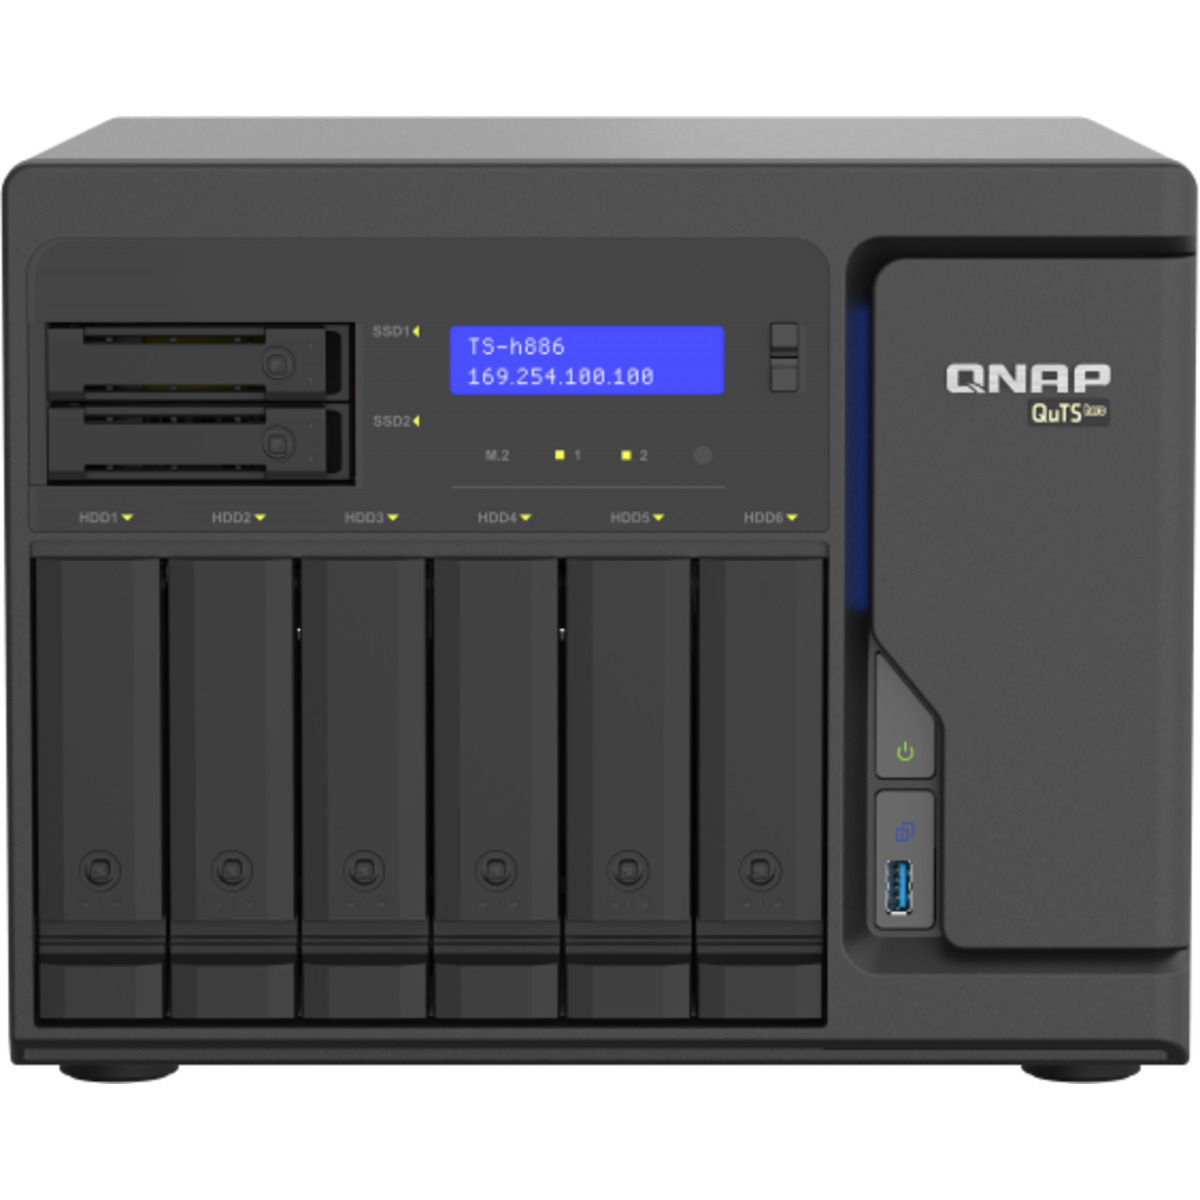 buy $3684 QNAP TS-h886 QuTS hero NAS 48tb Desktop NAS - Network Attached Storage Device 6x8000gb Seagate EXOS ST8000NM000A 3.5 7200rpm SATA 6Gb/s HDD ENTERPRISE Class Drives Installed - Burn-In Tested - nas headquarters buy network attached storage server device das new raid-5 free shipping usa christmas new year holiday sale TS-h886 QuTS hero NAS